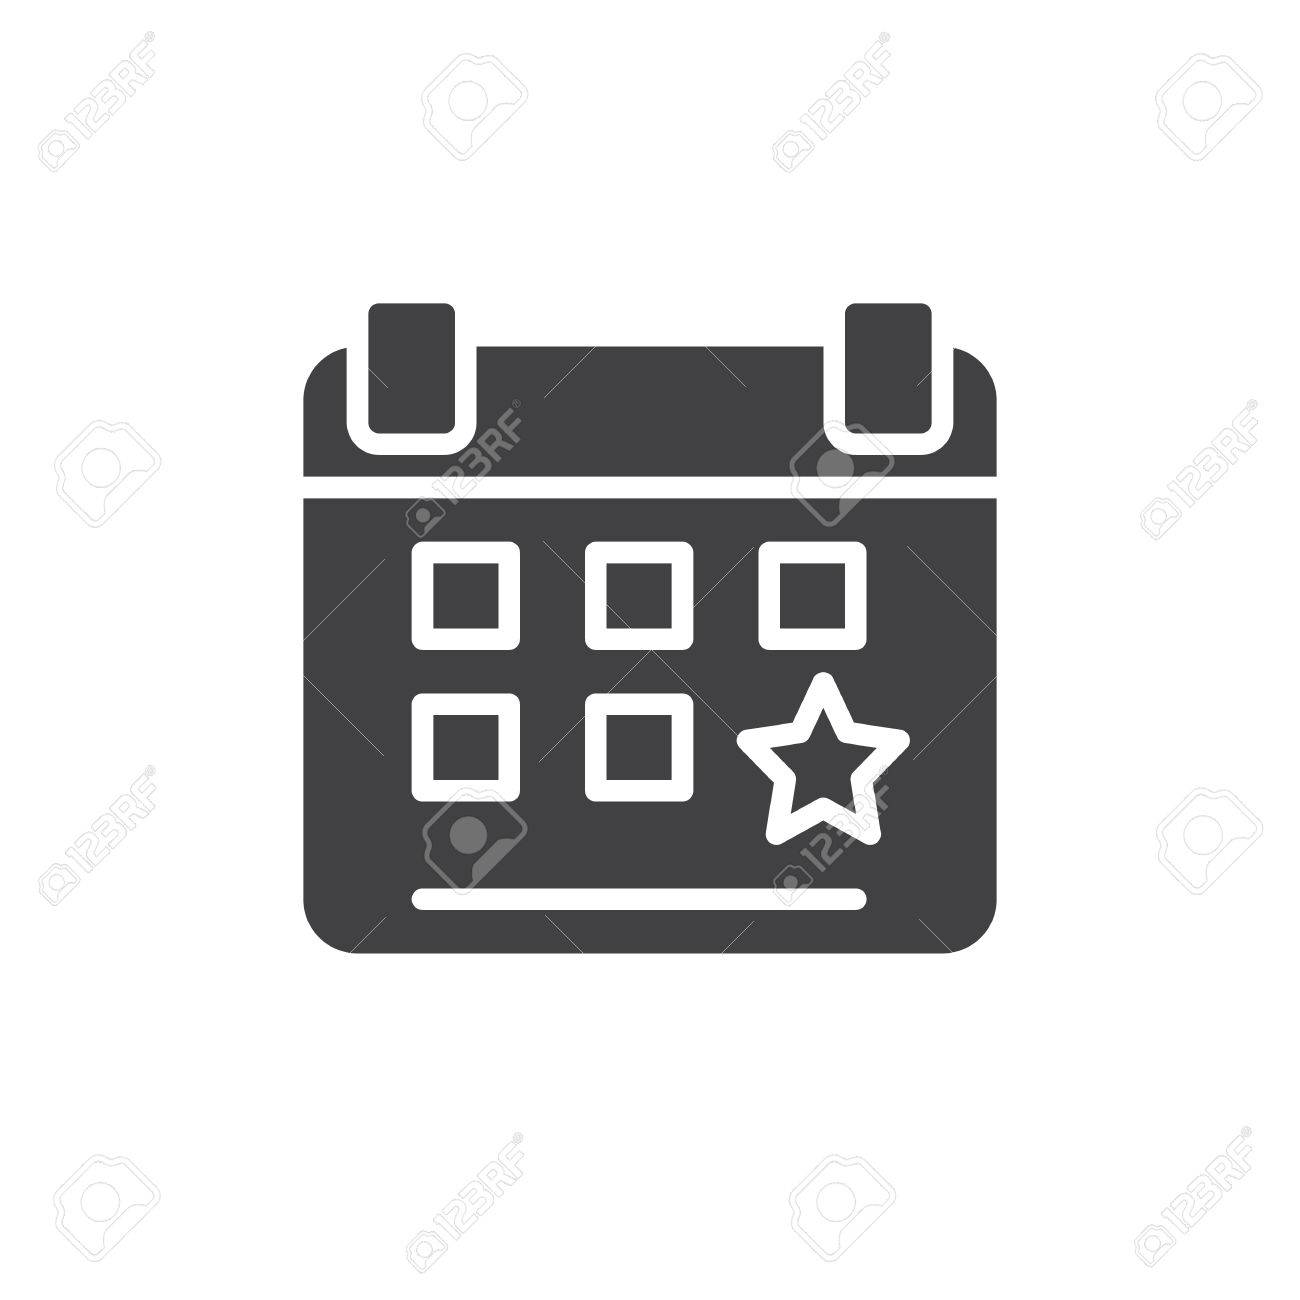 Reminder Icon Stock Vector Art  More Images of 2015 490279260 